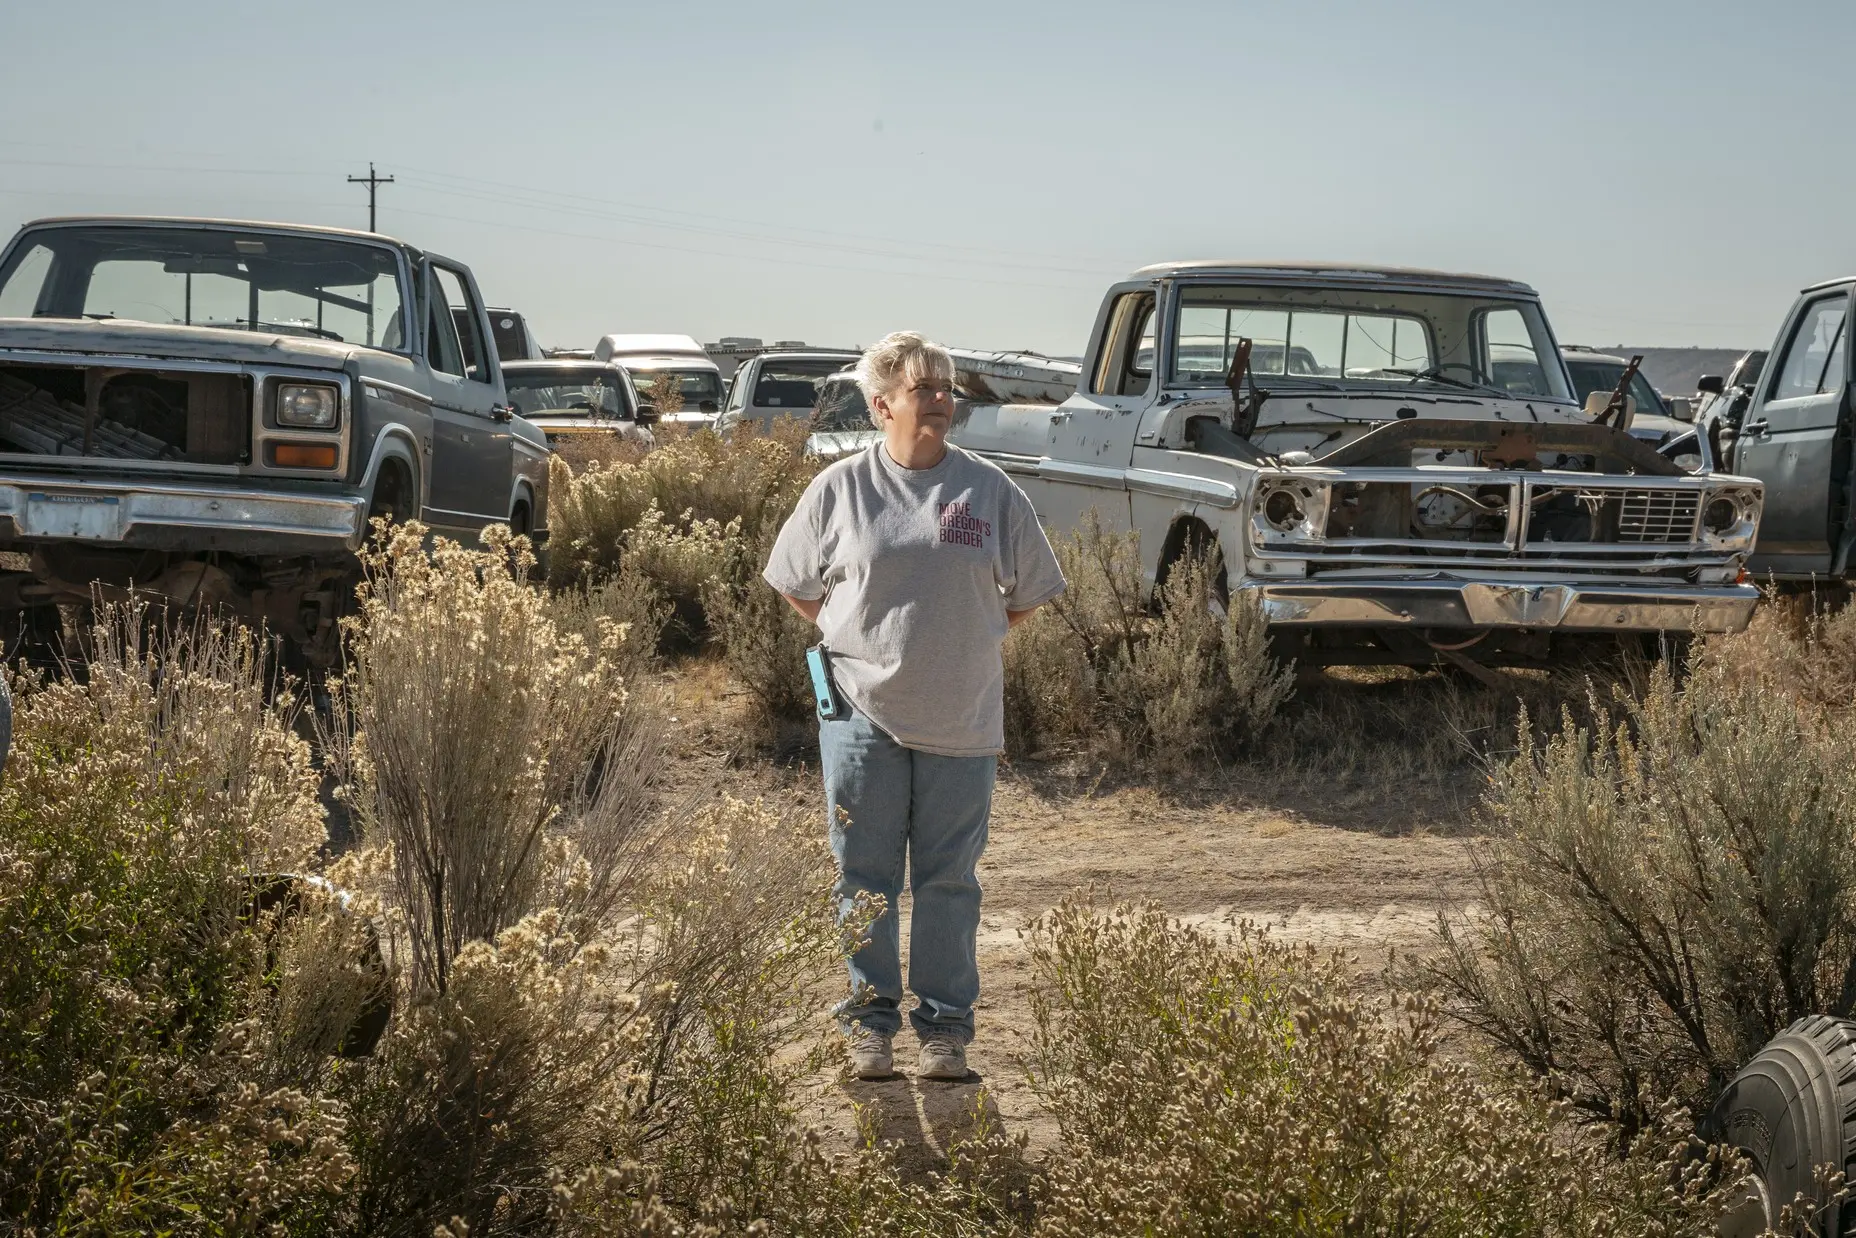 Woman stands in front of cars in an abandonded car lot 